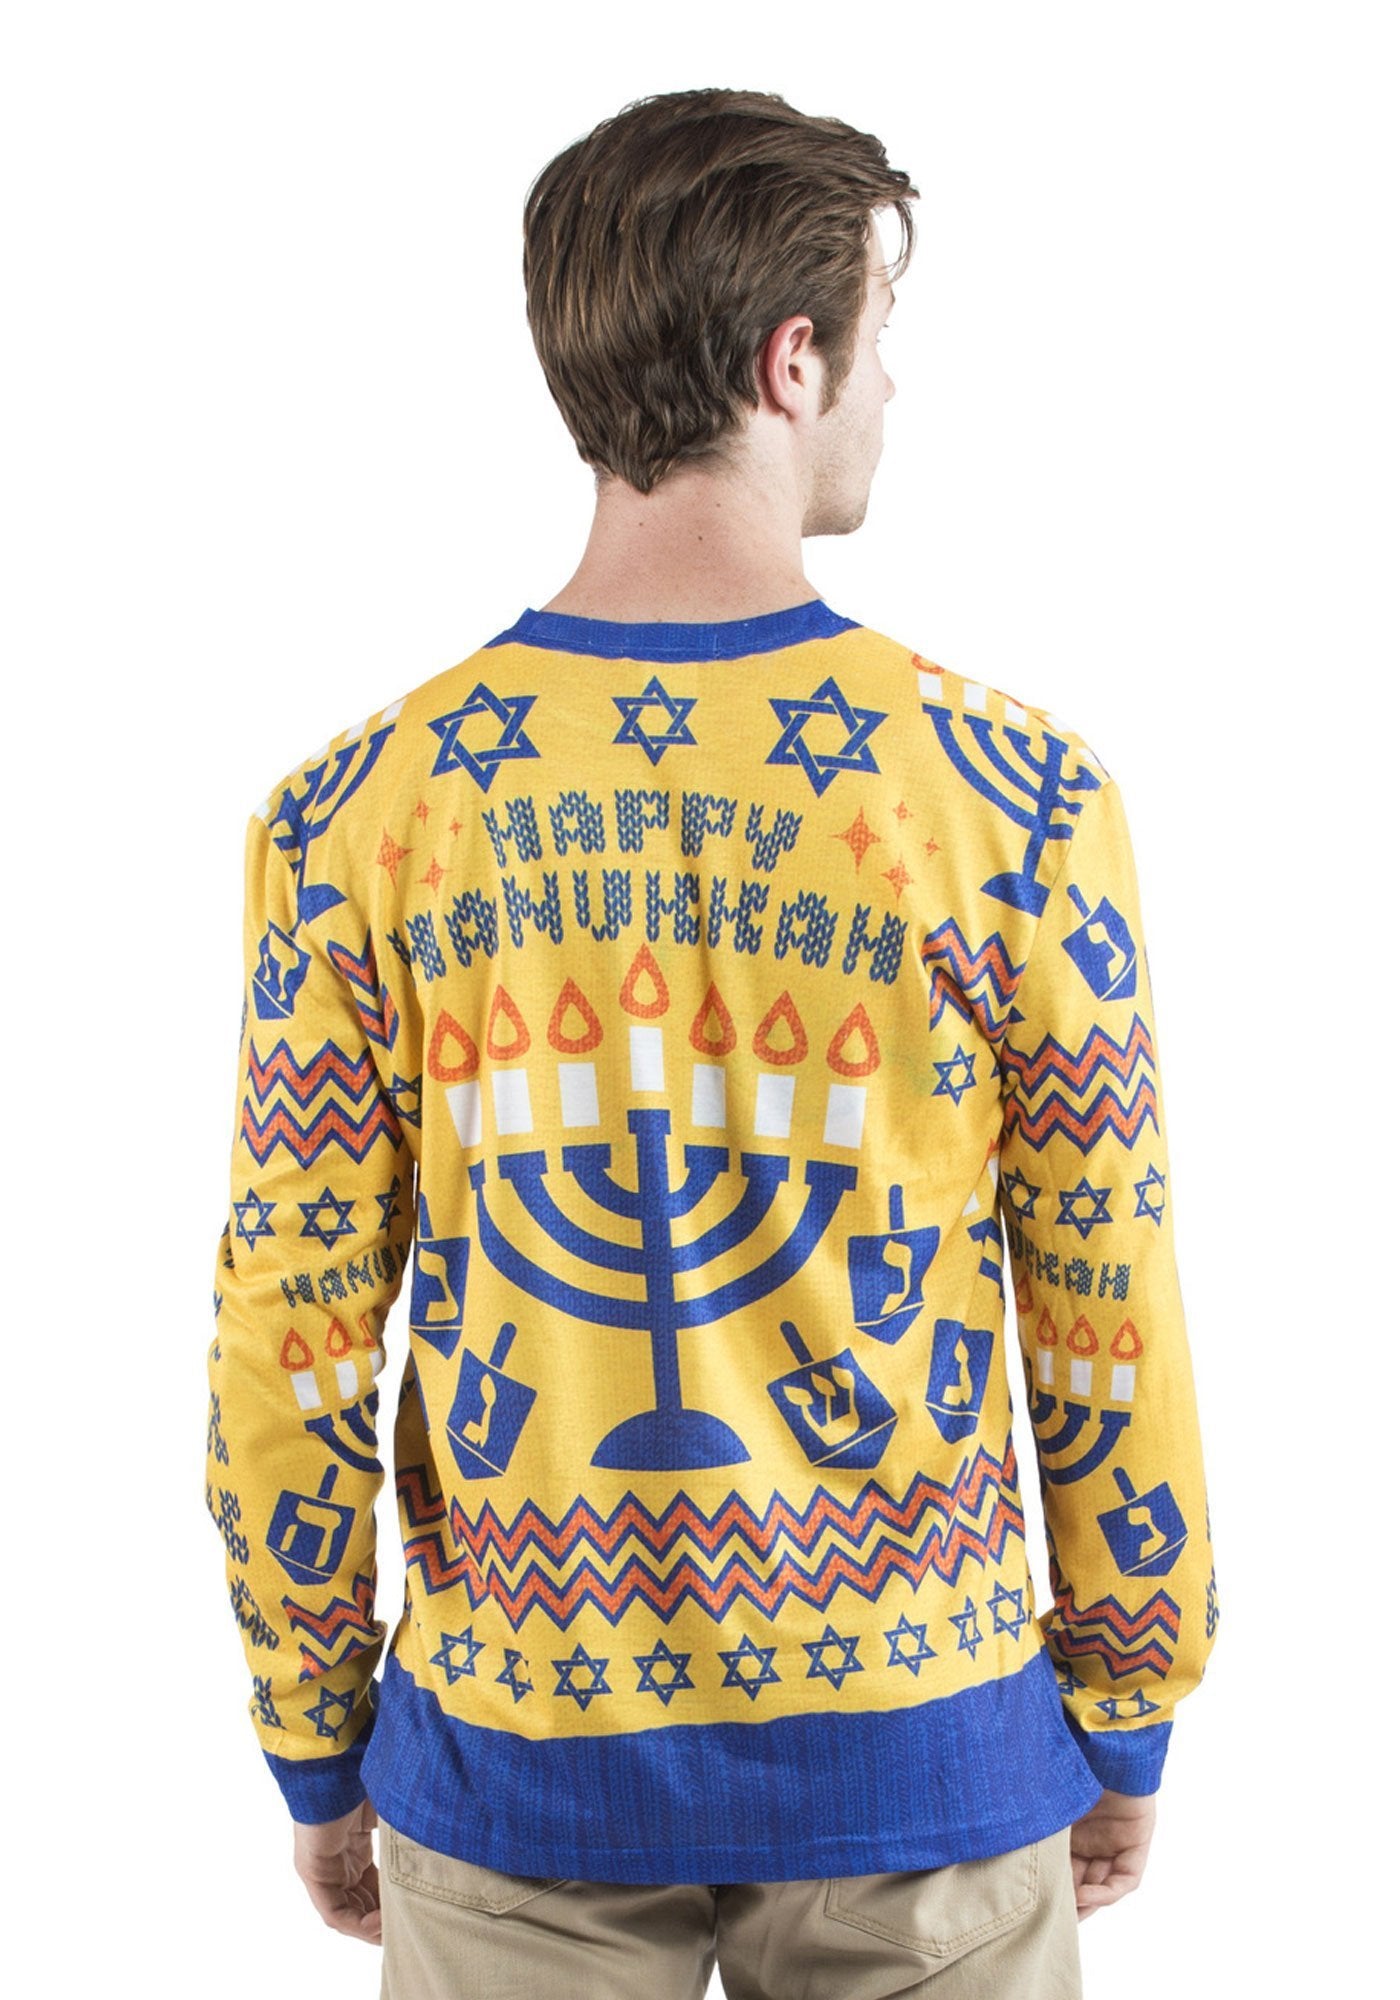 FauxReal Sweaters Ugly Hanukkah T-Shirt/Sweater - Unisex